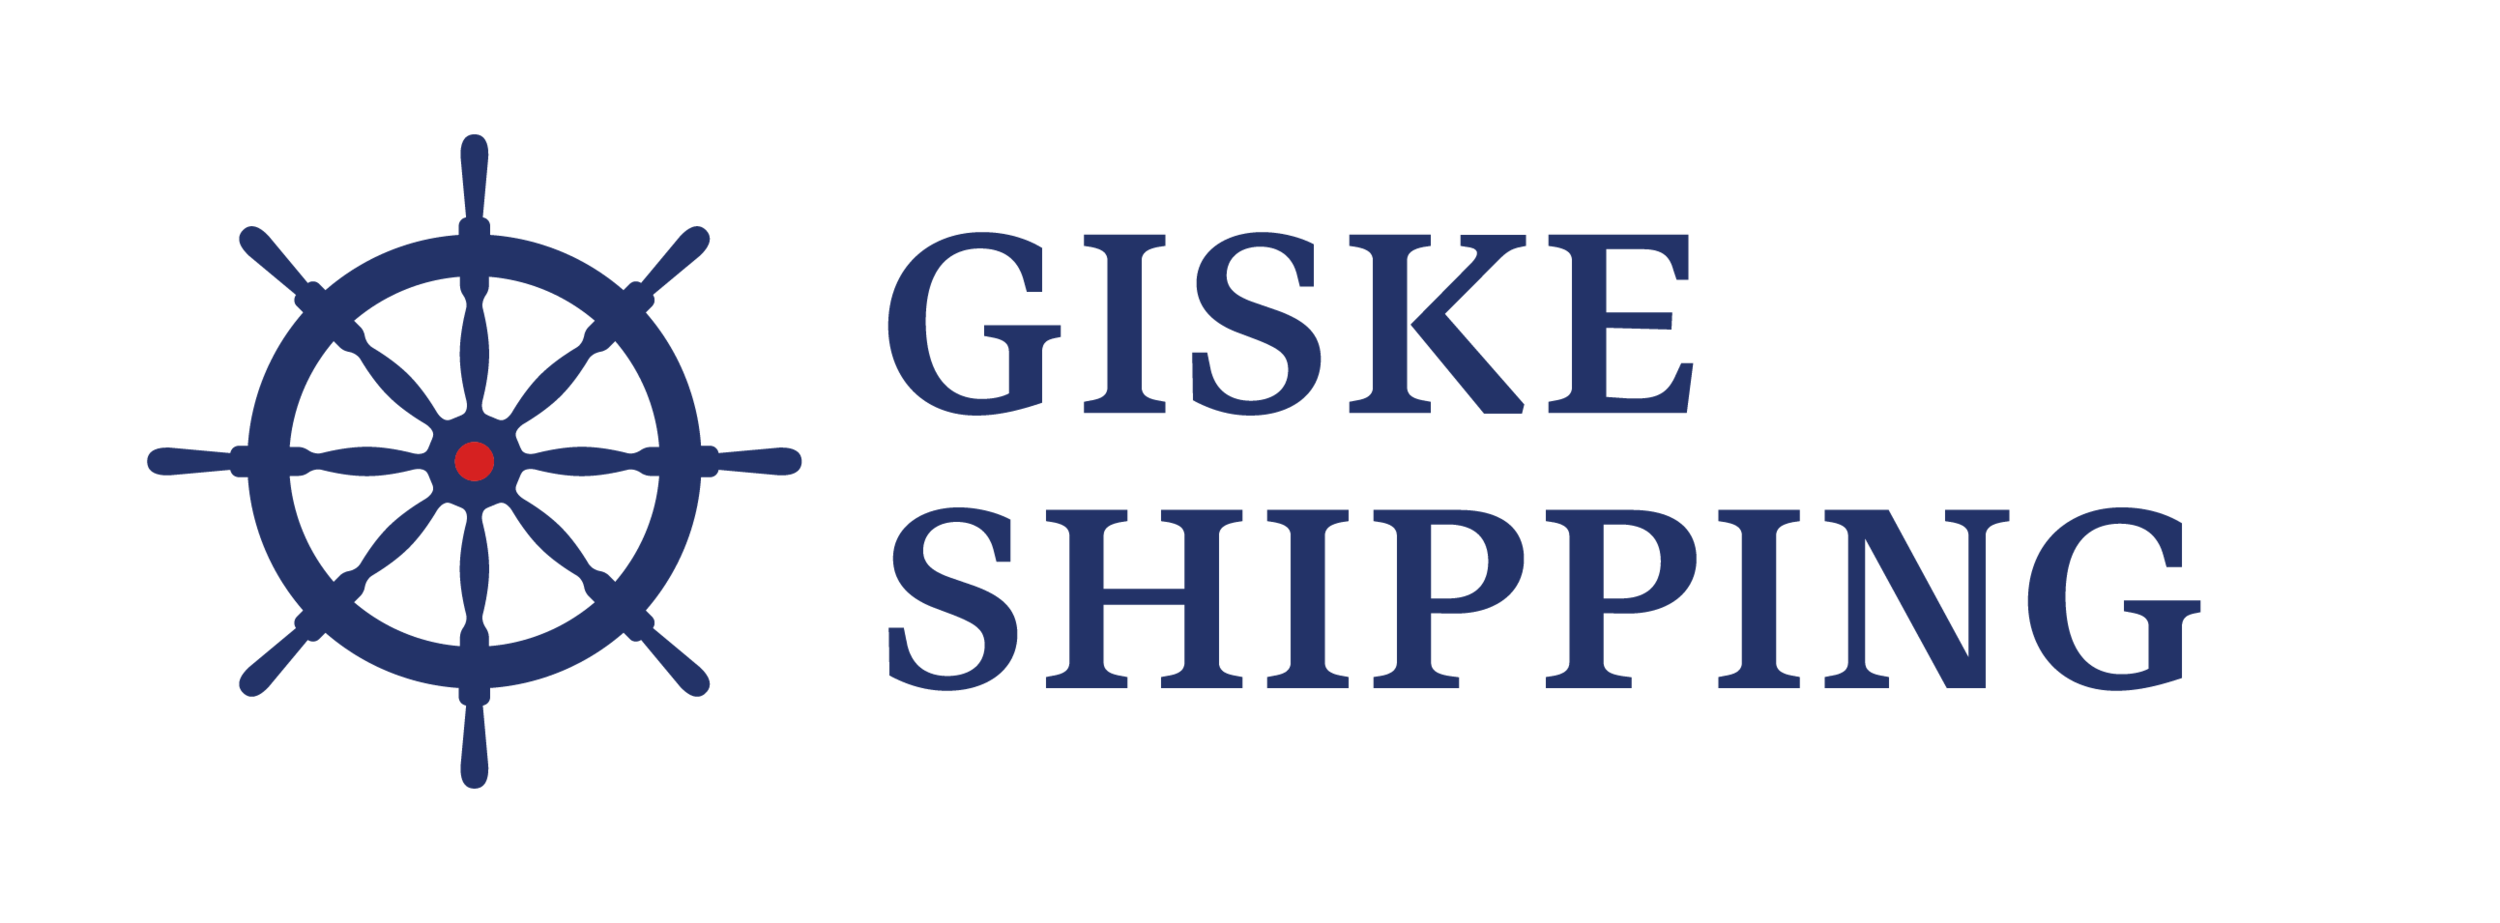 Giske Network Technology is a Norwegian company that provides innovative software-defined networking solutions for data centers. They specialize in developing products that improve network performance, scalability, and security, using machine learning and artificial intelligence. Their clients include enterprises, service providers, and government agencies.